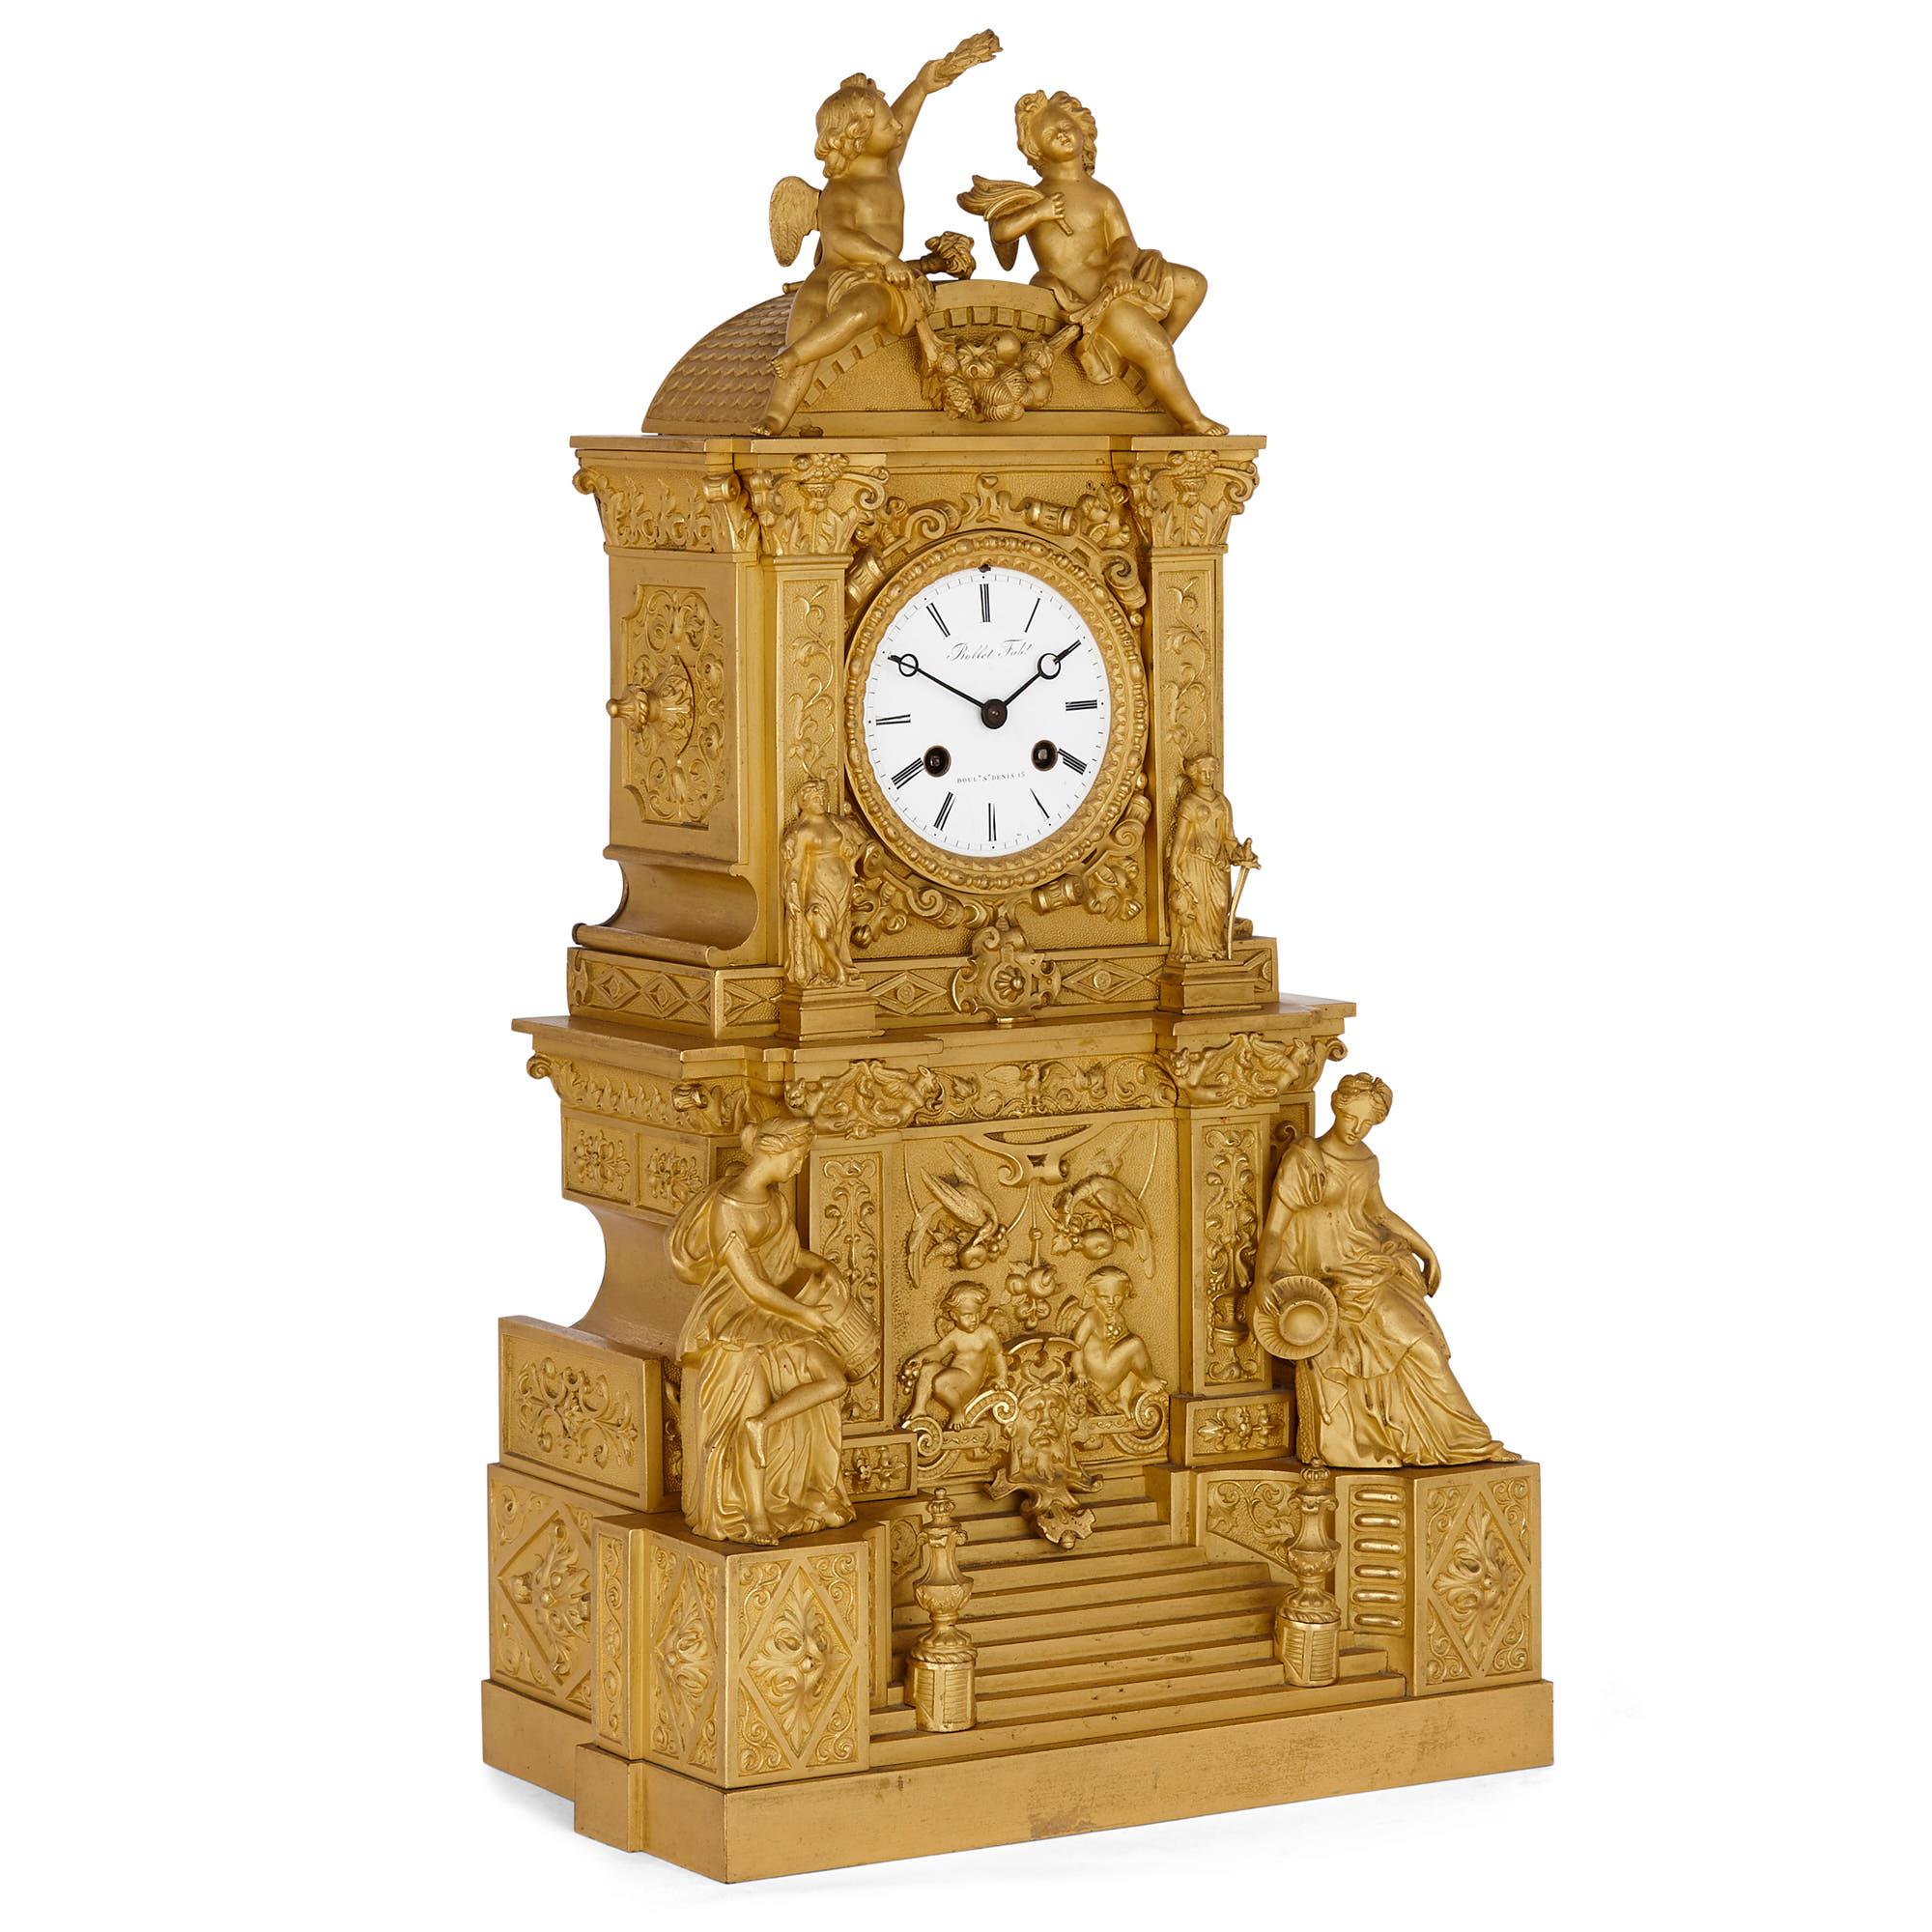 French architecturally formed ormolu mantel clock
French, 19th Century
Height 52cm, width 28cm, depth 17cm

This beautiful Baroque style mantel clock is crafted from gilt bronze. The highly detailed case takes the form of a piece of miniaturised